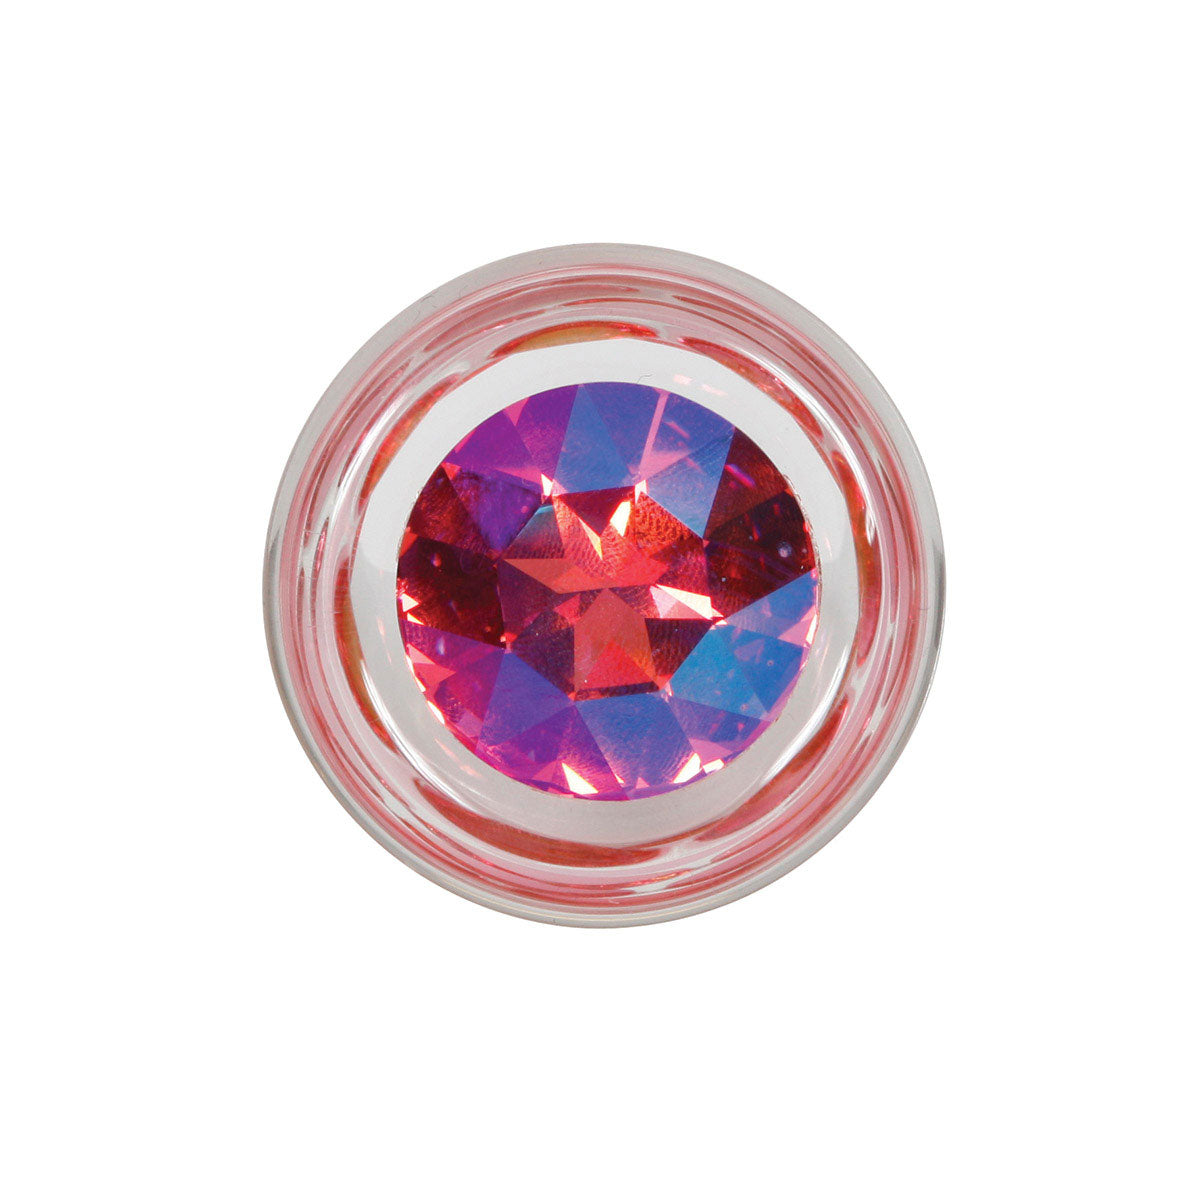 Crystal Delights Pineapple Delight Butt Plug with Pink Crystal